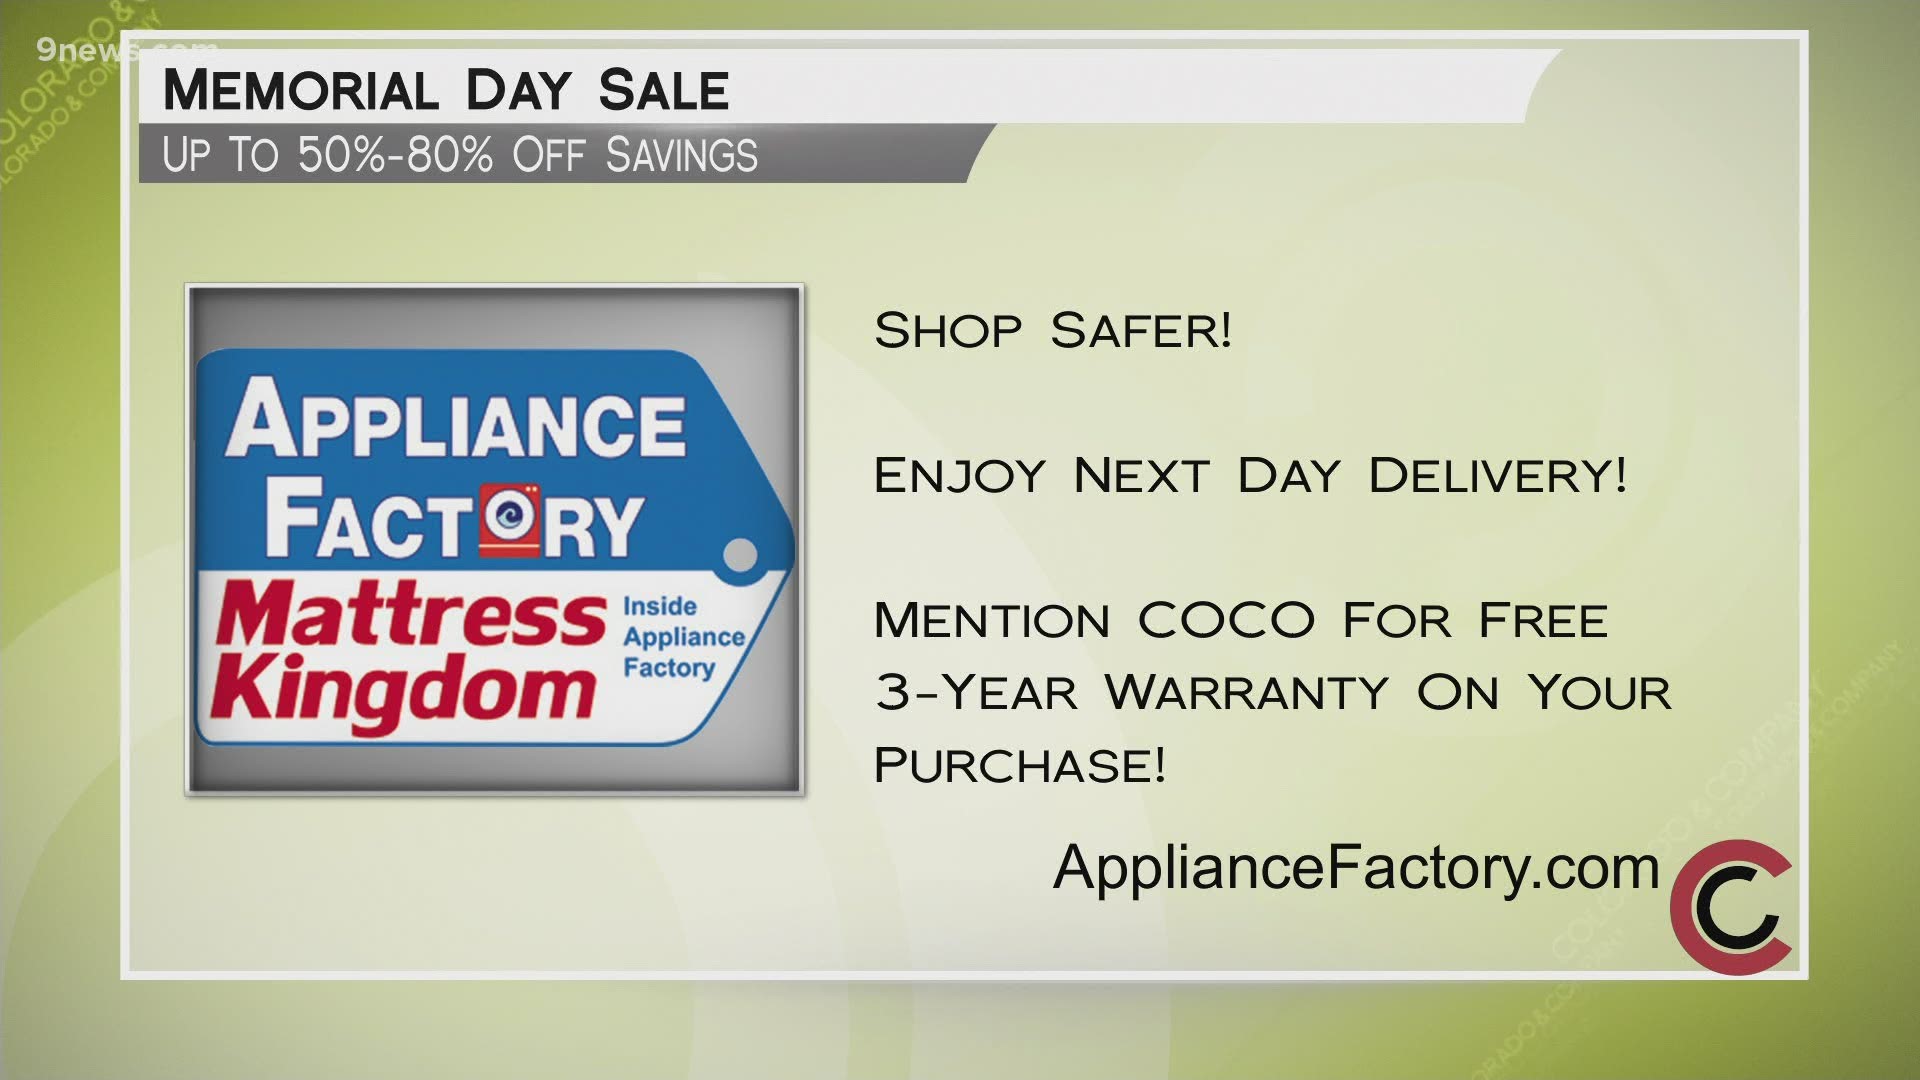 Shop safer at Appliance Factory and Mattress Kingdom and save between 50-80% with their Memorial Day Sale. Shop at ApplianceFactory.com or find a store near you.